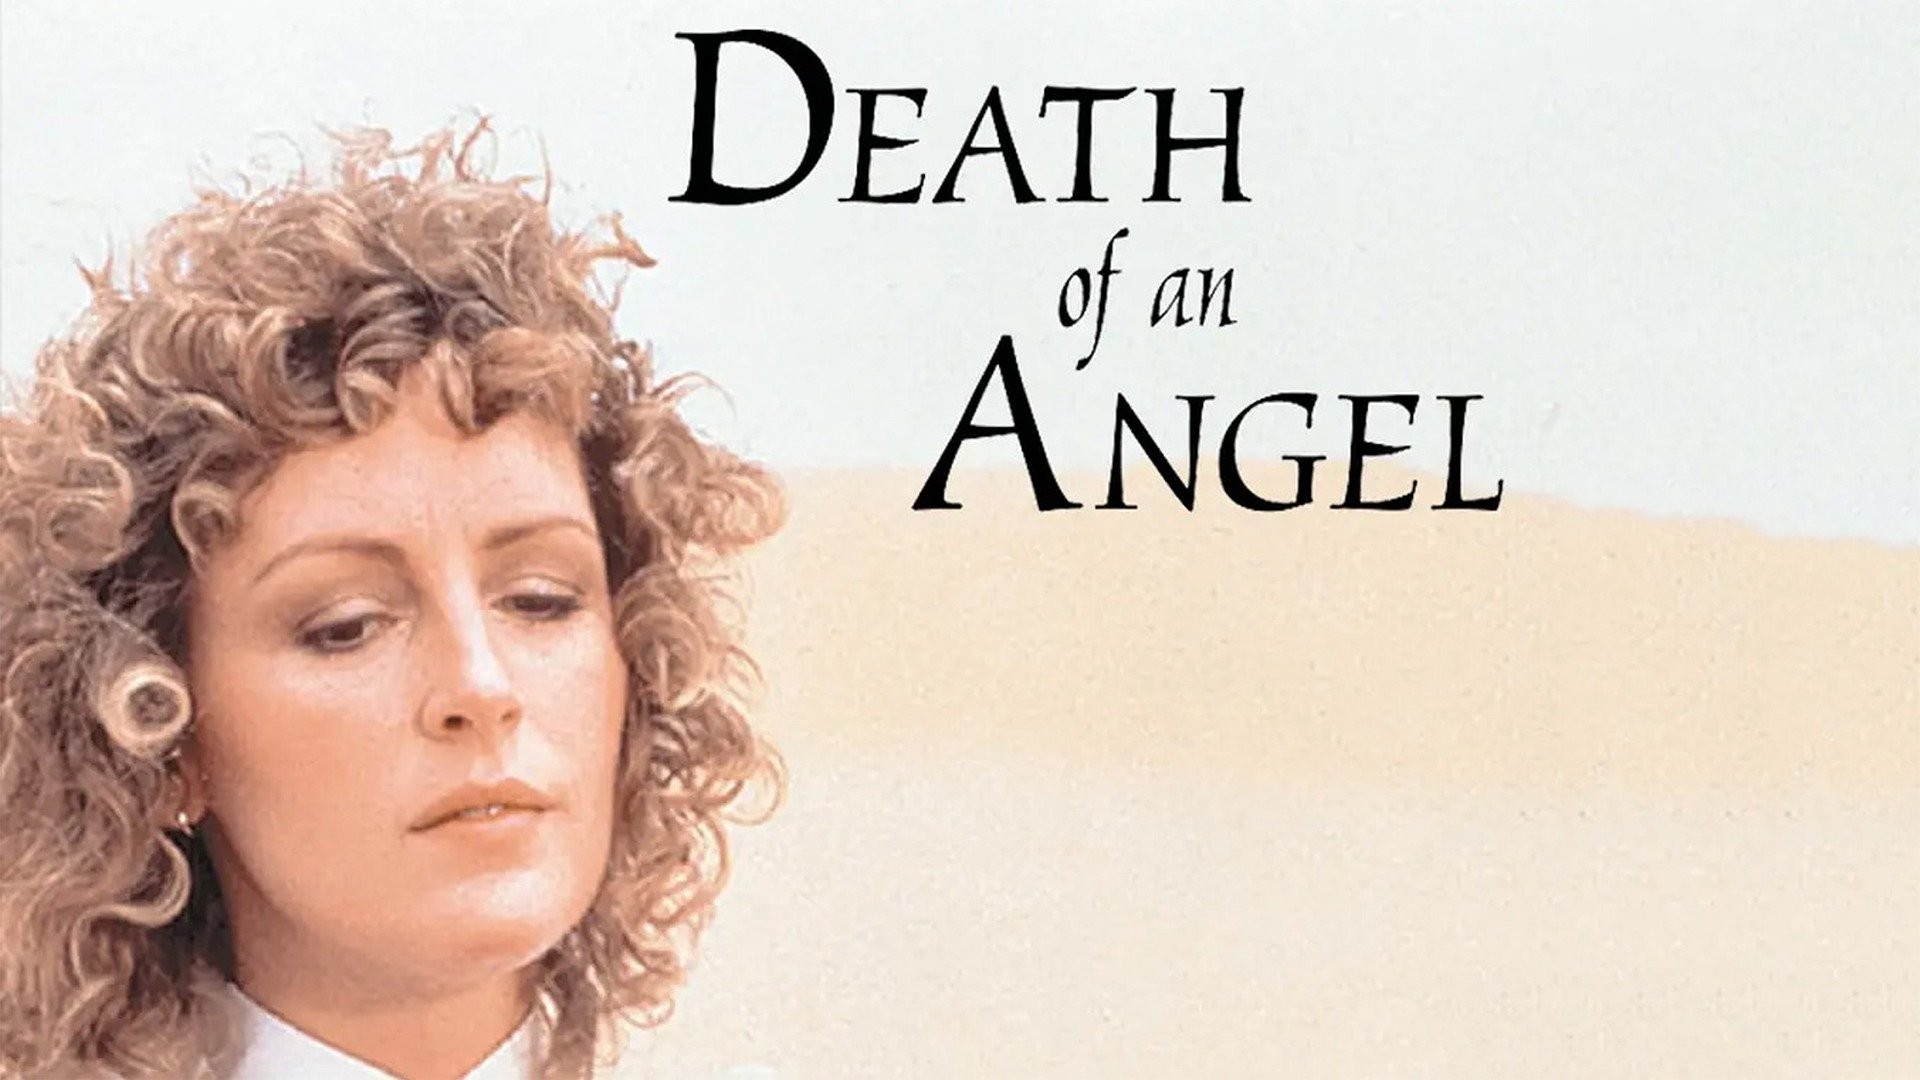 Angel of Death - Rotten Tomatoes